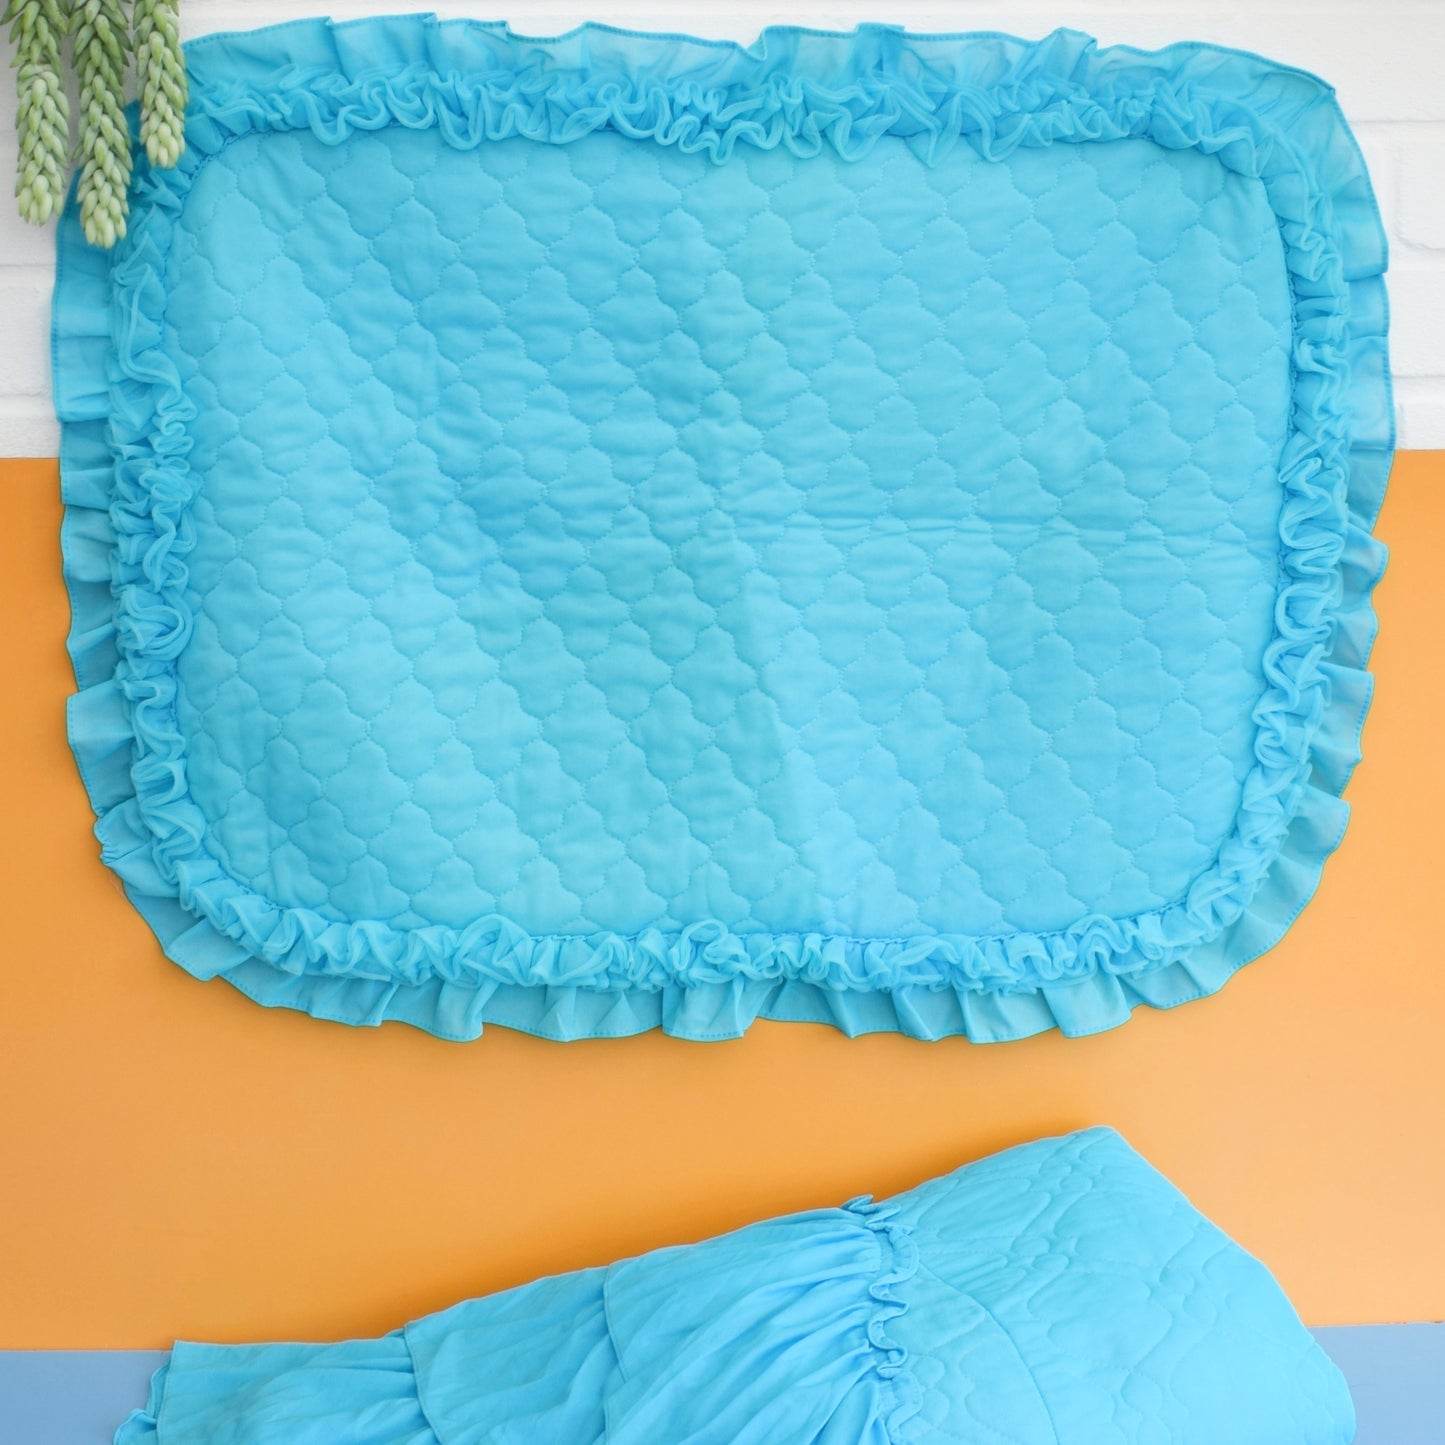 Vintage 1960s Double Bed Cover - Nylon Frill - Turquoise